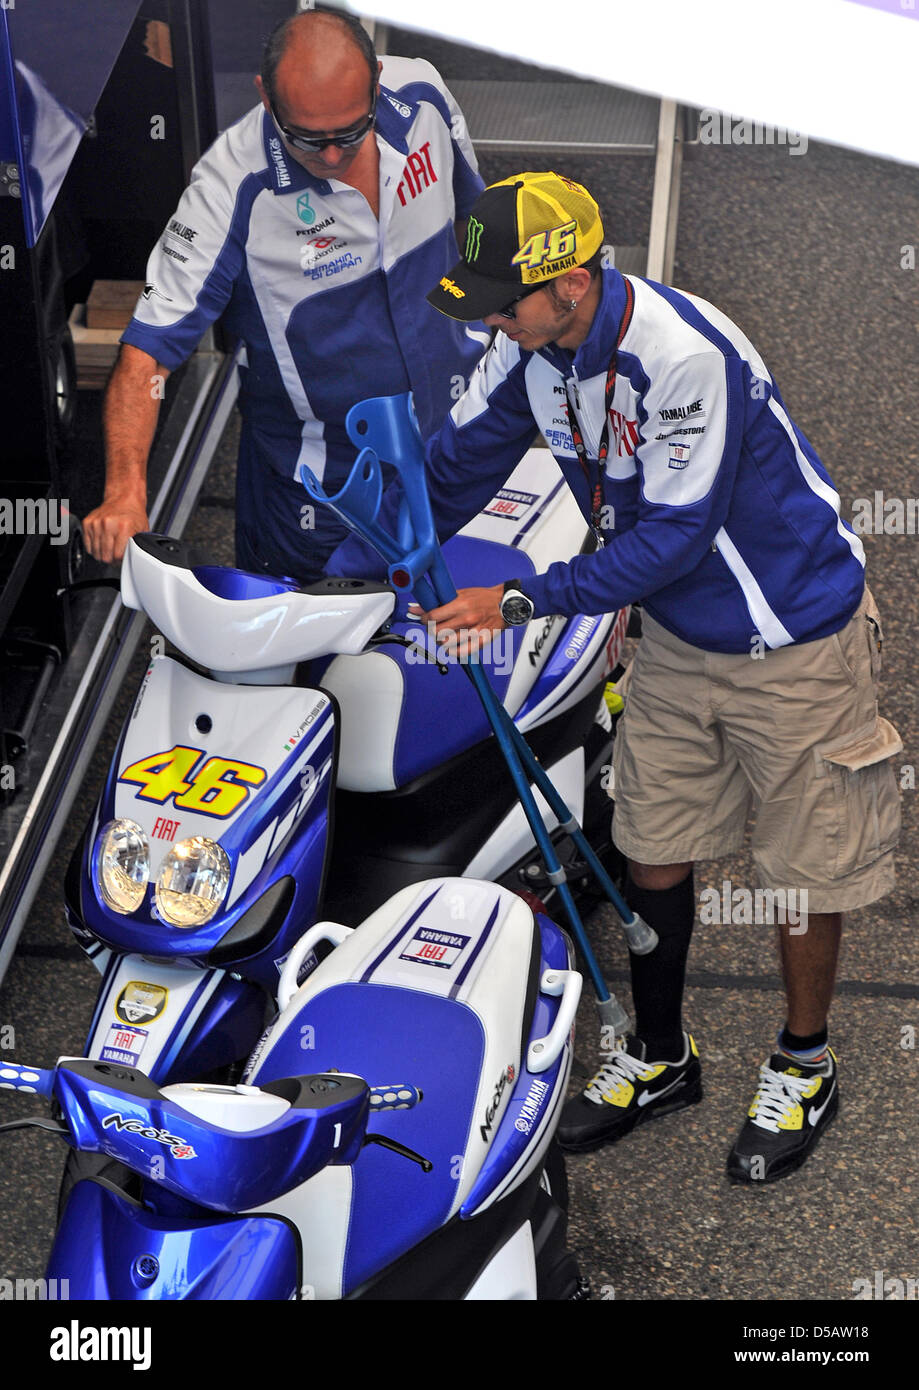 The Italian Yamaha driver and MotoGP superstar Valentino Rossi uses his  crutches to descend from a scooter in the paddock at the German Motorcycle  Grand Prix on the Sachsenring in Hohenstein-Ernstthal, Germany,